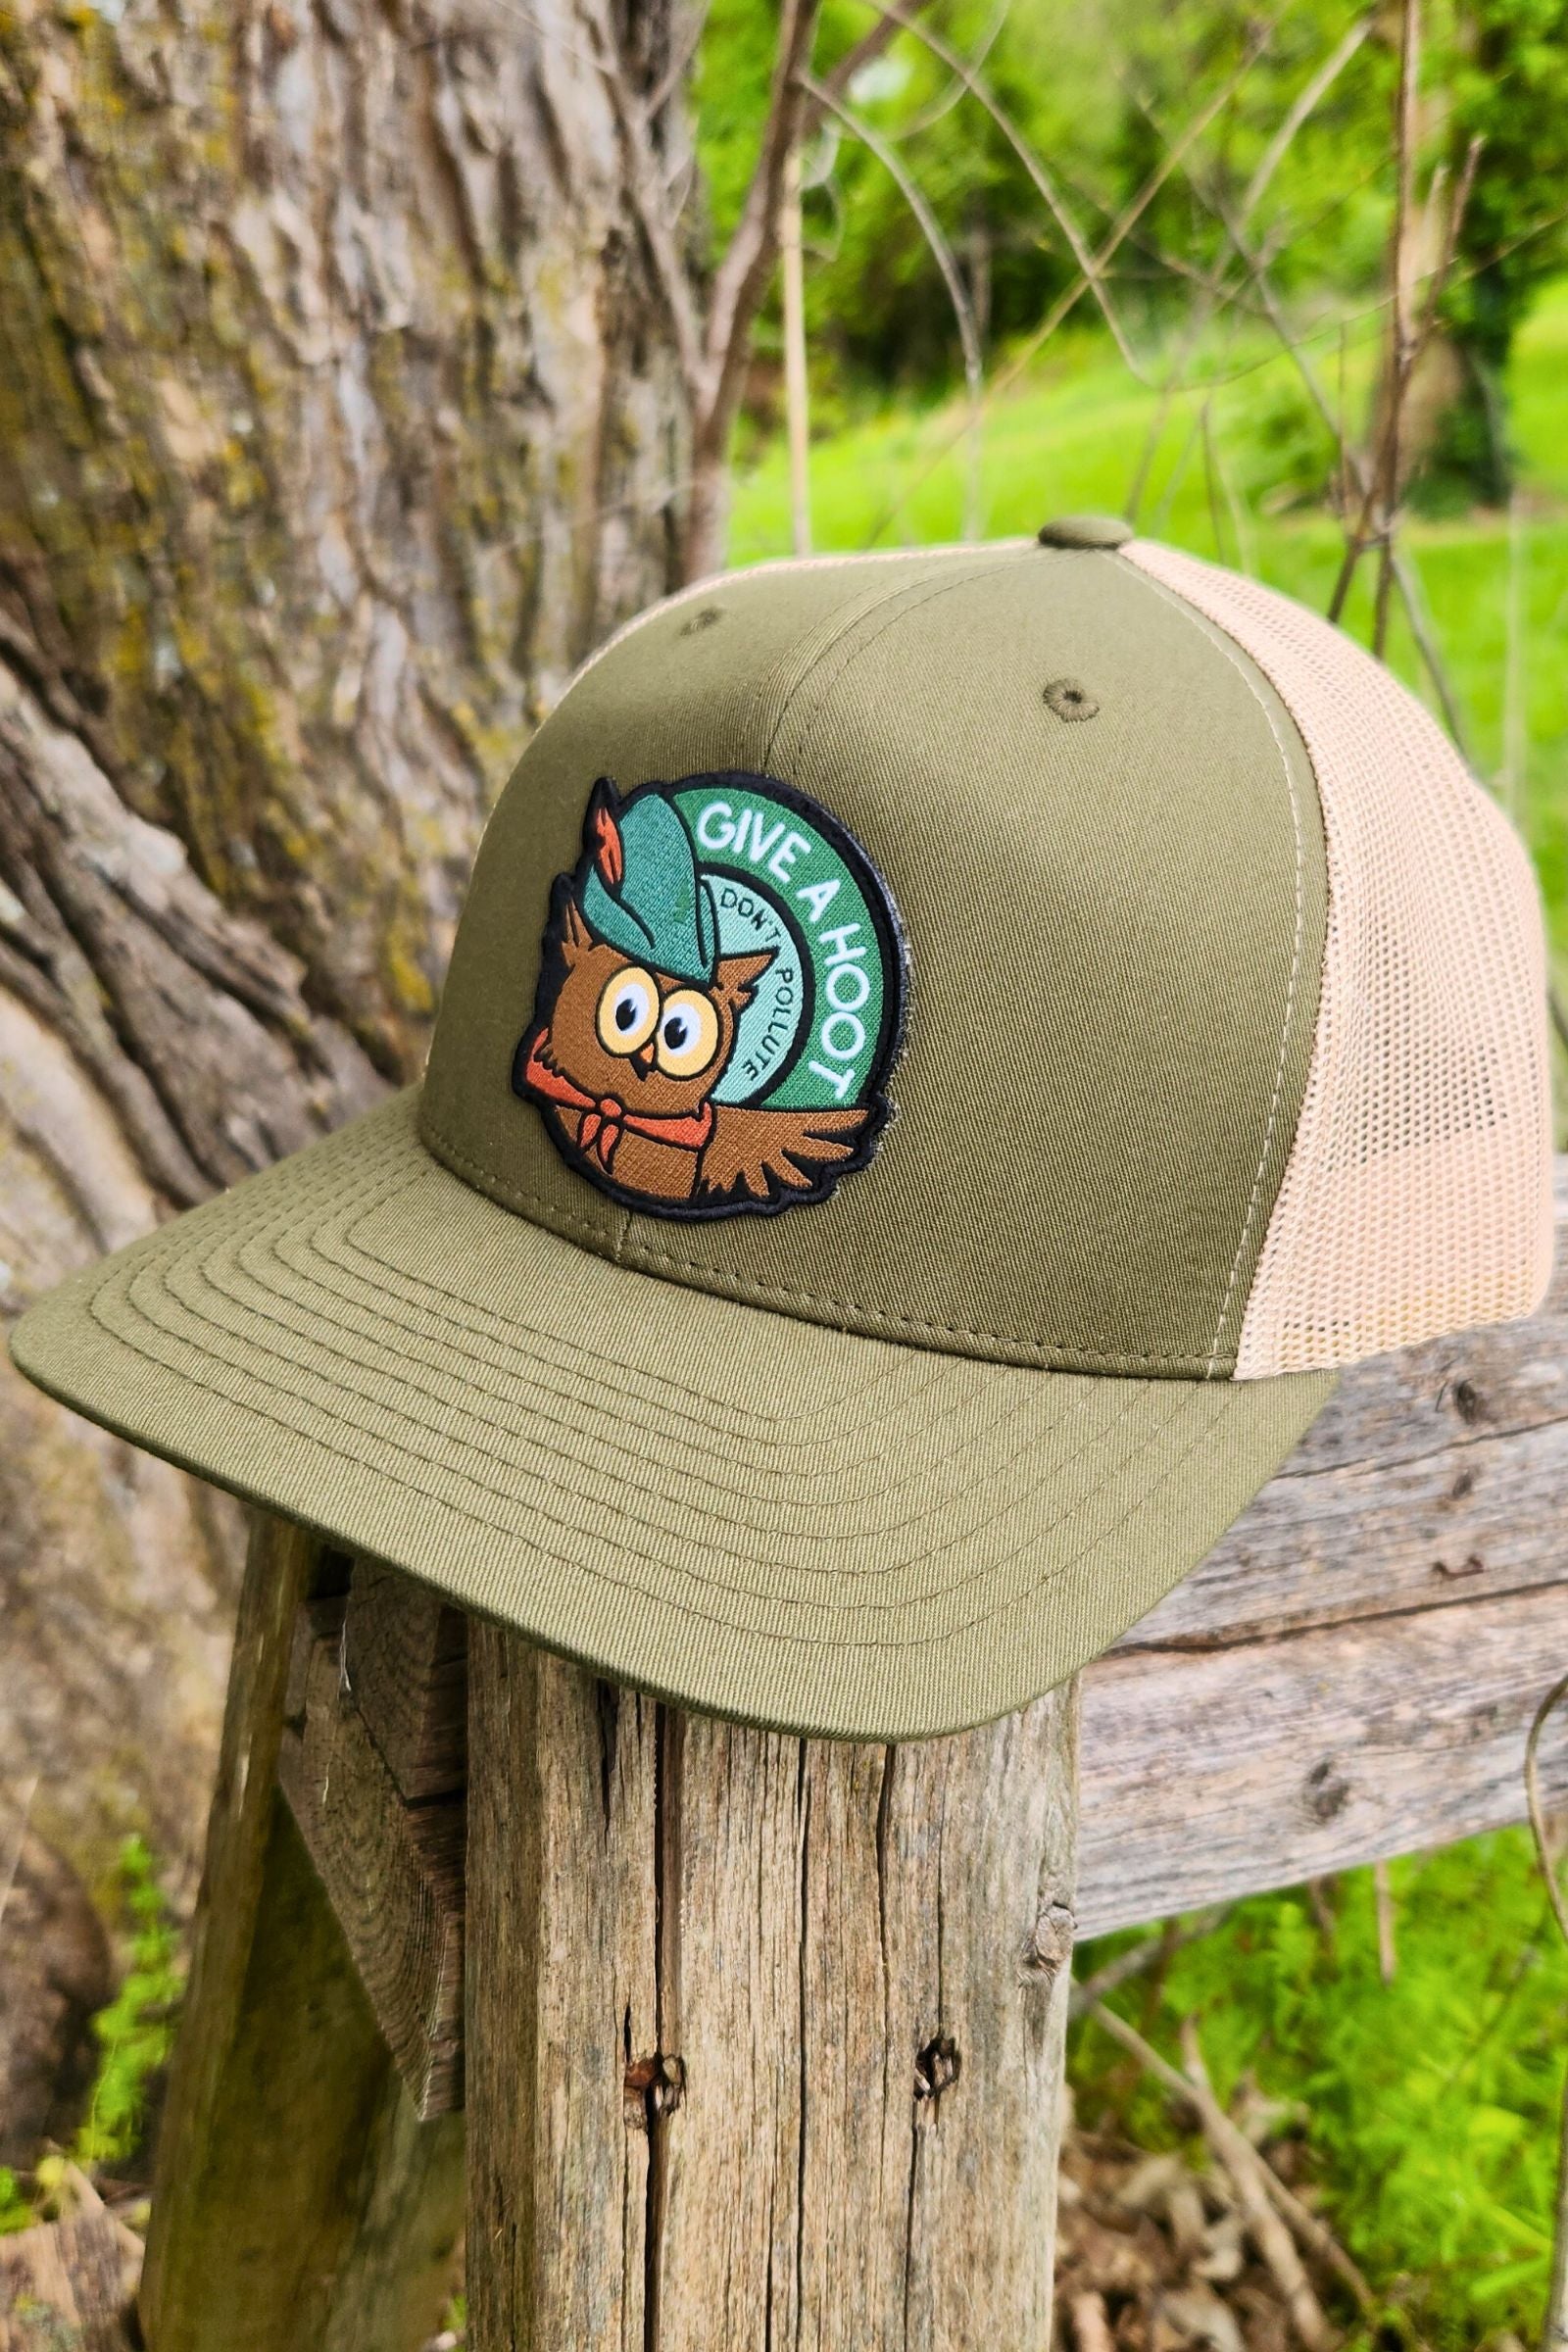 Give a Hoot Don't Pollute Trucker Hat